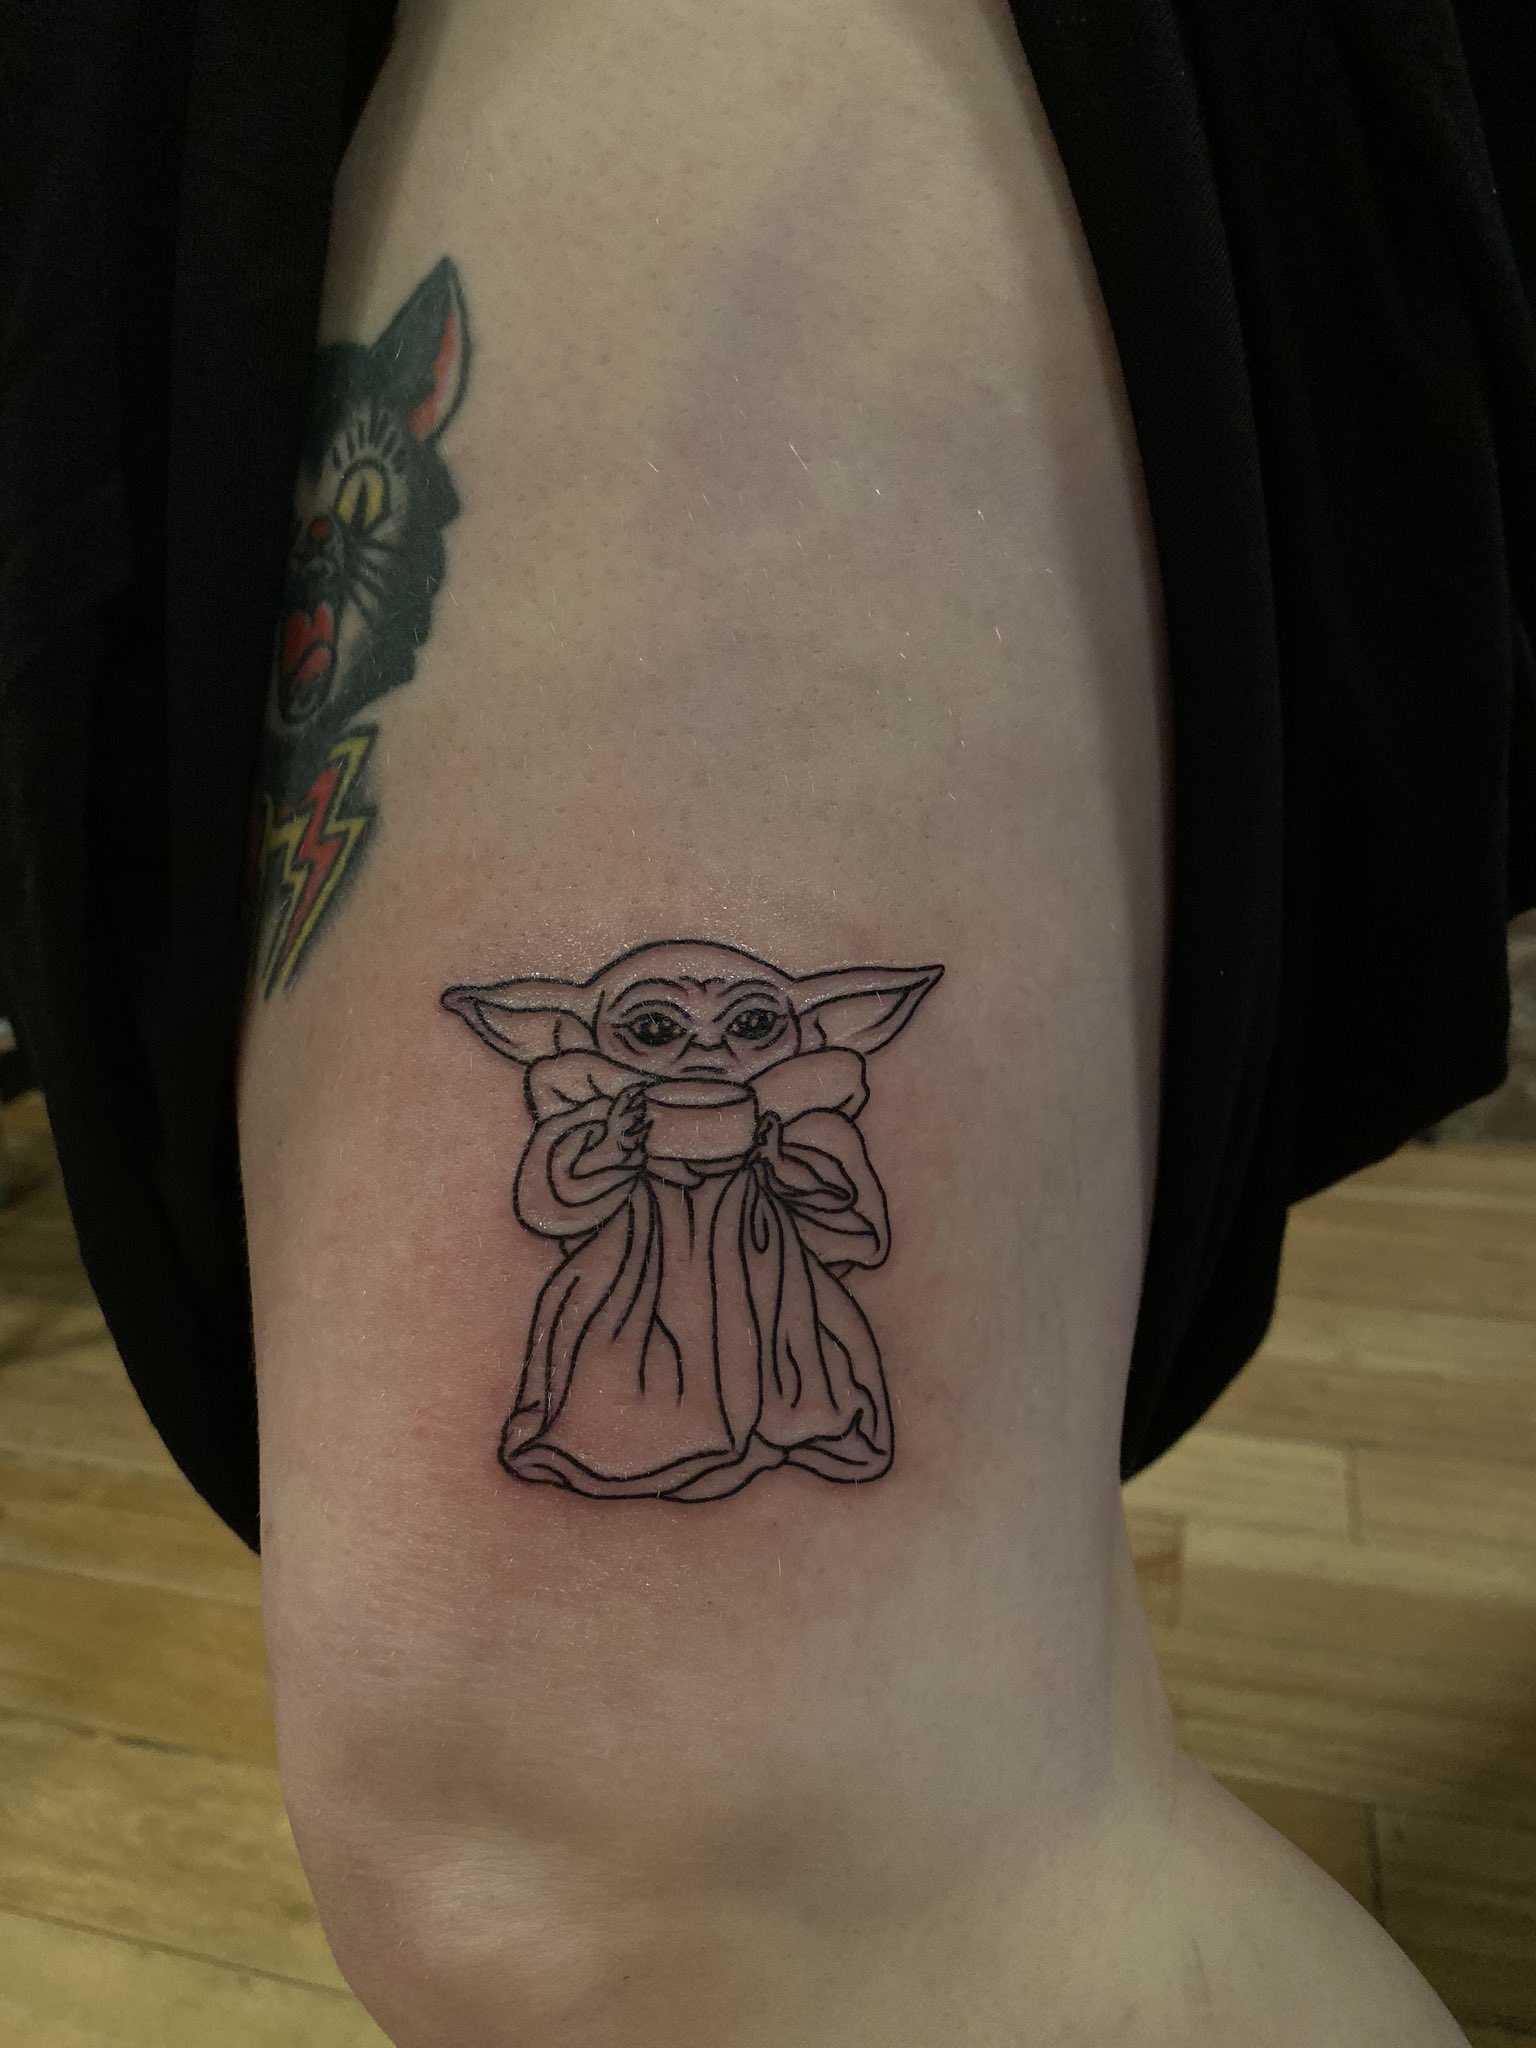 Rachel Baby Yoda Went W Outline So I Can Decide Later About Color Or Shading